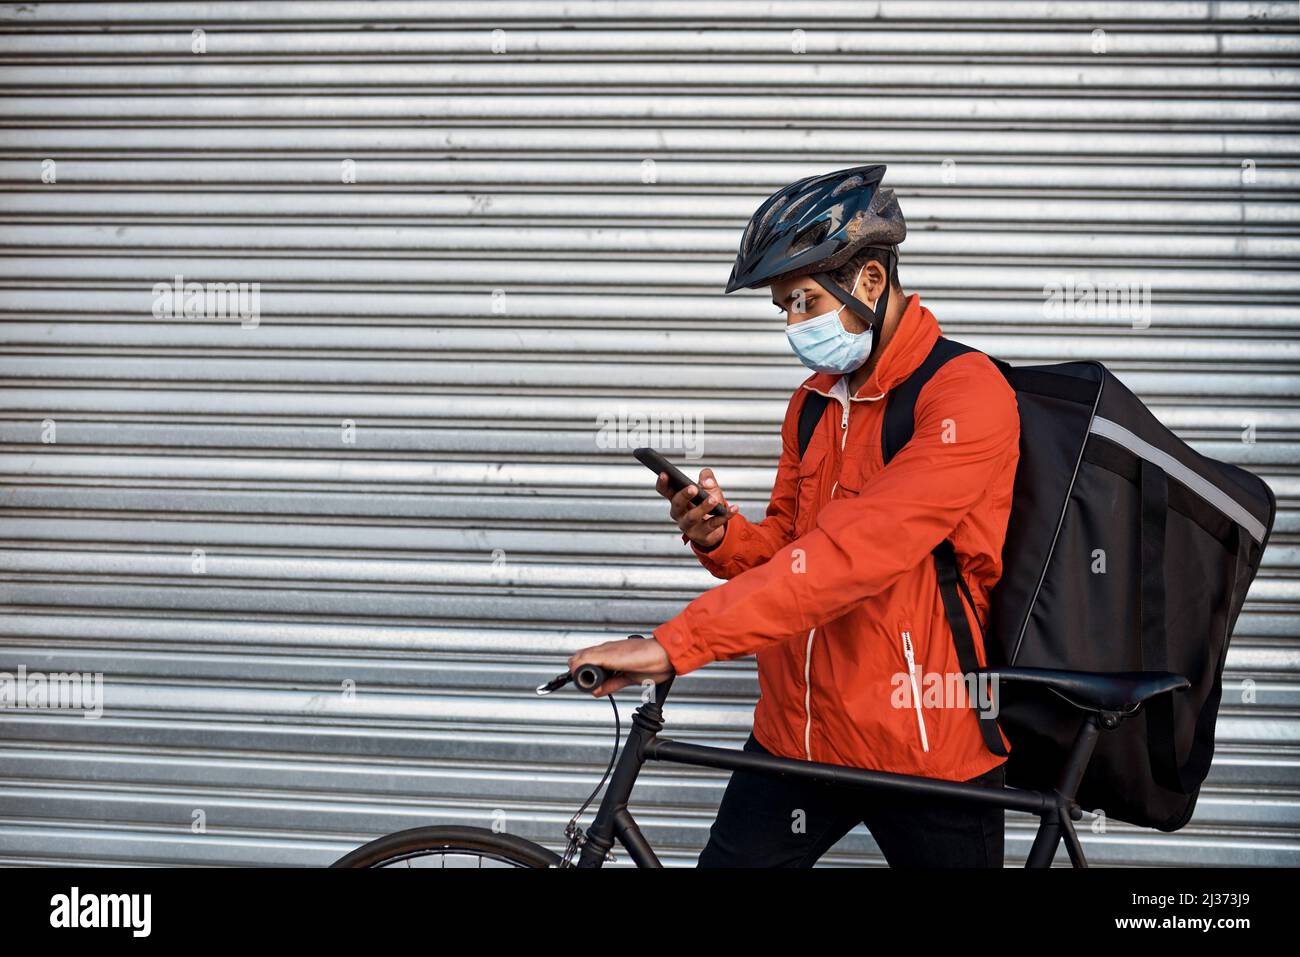 Checking his app for the next delivery location. Shot of a masked man using his cellphone while out on his bicycle for a delivery. Stock Photo